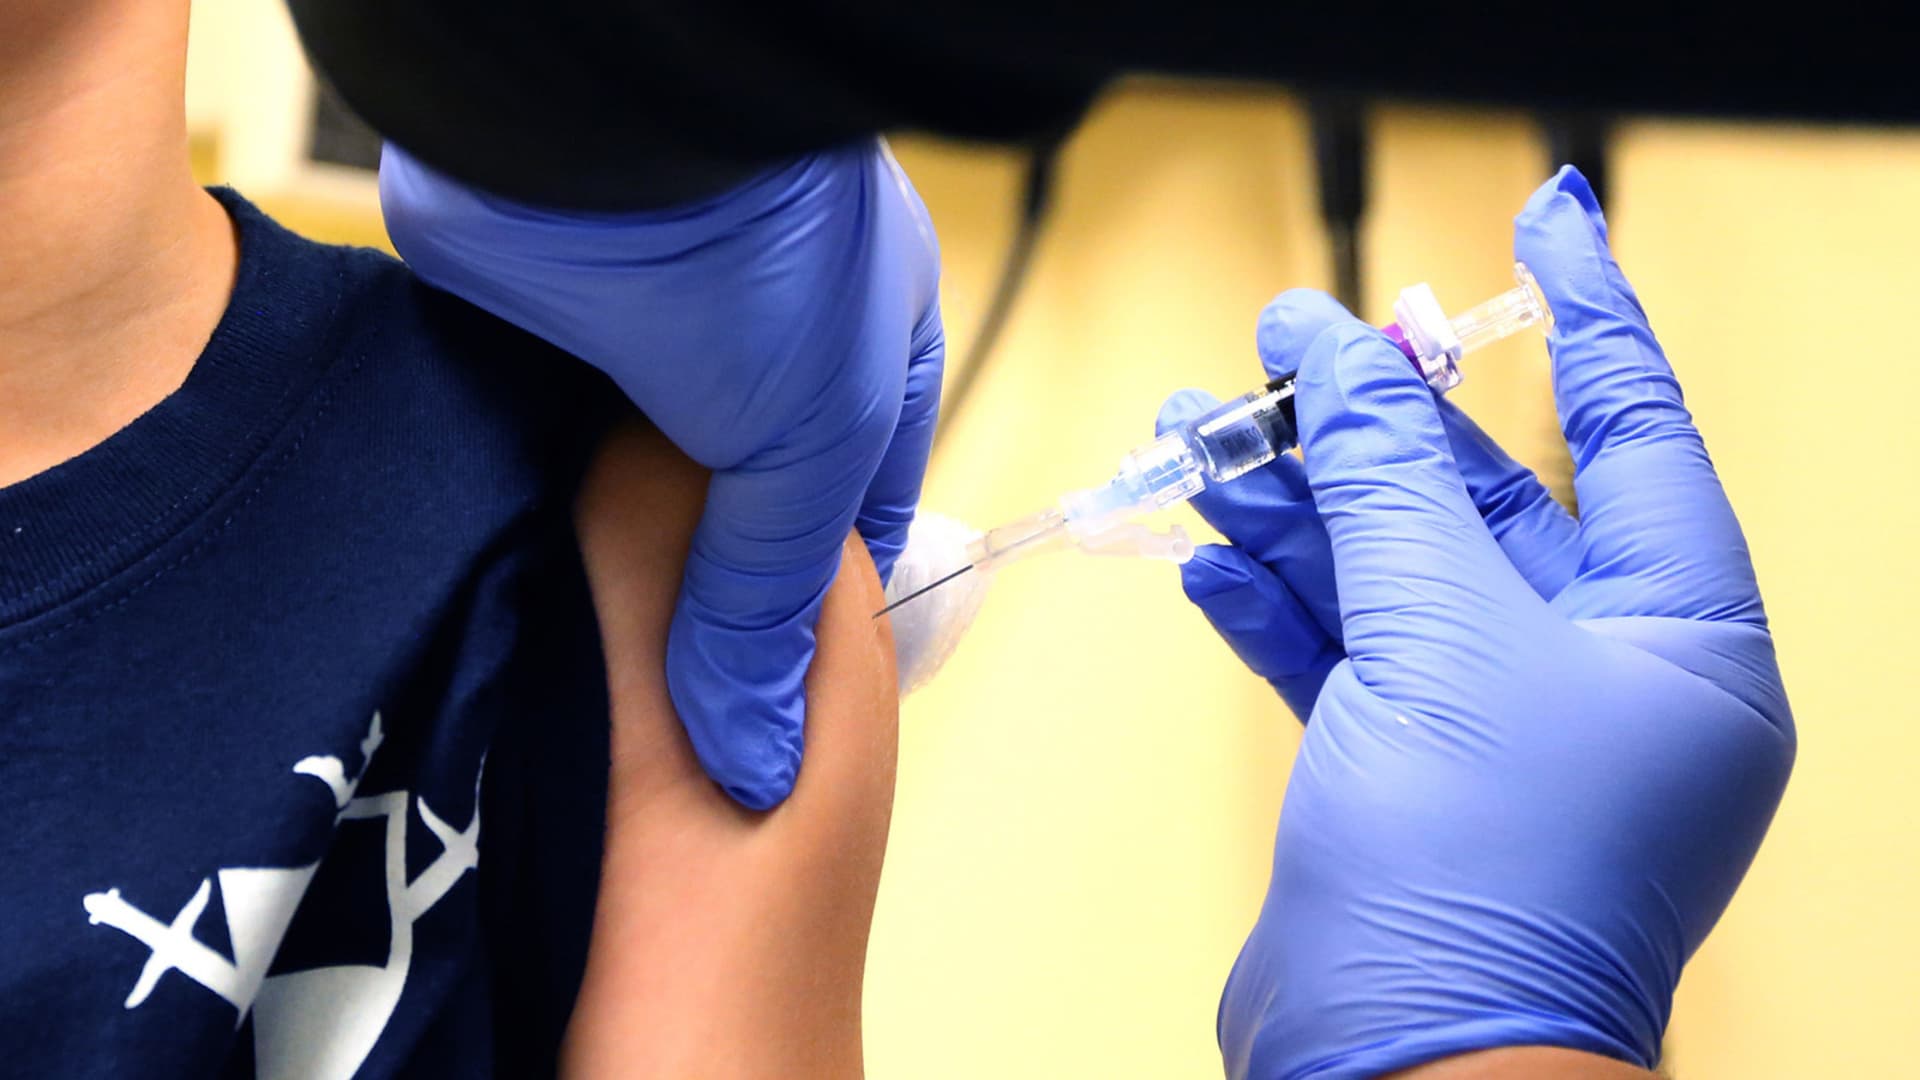 Massachusetts requires most students to get flu vaccine to ease burden on health system during pandemic